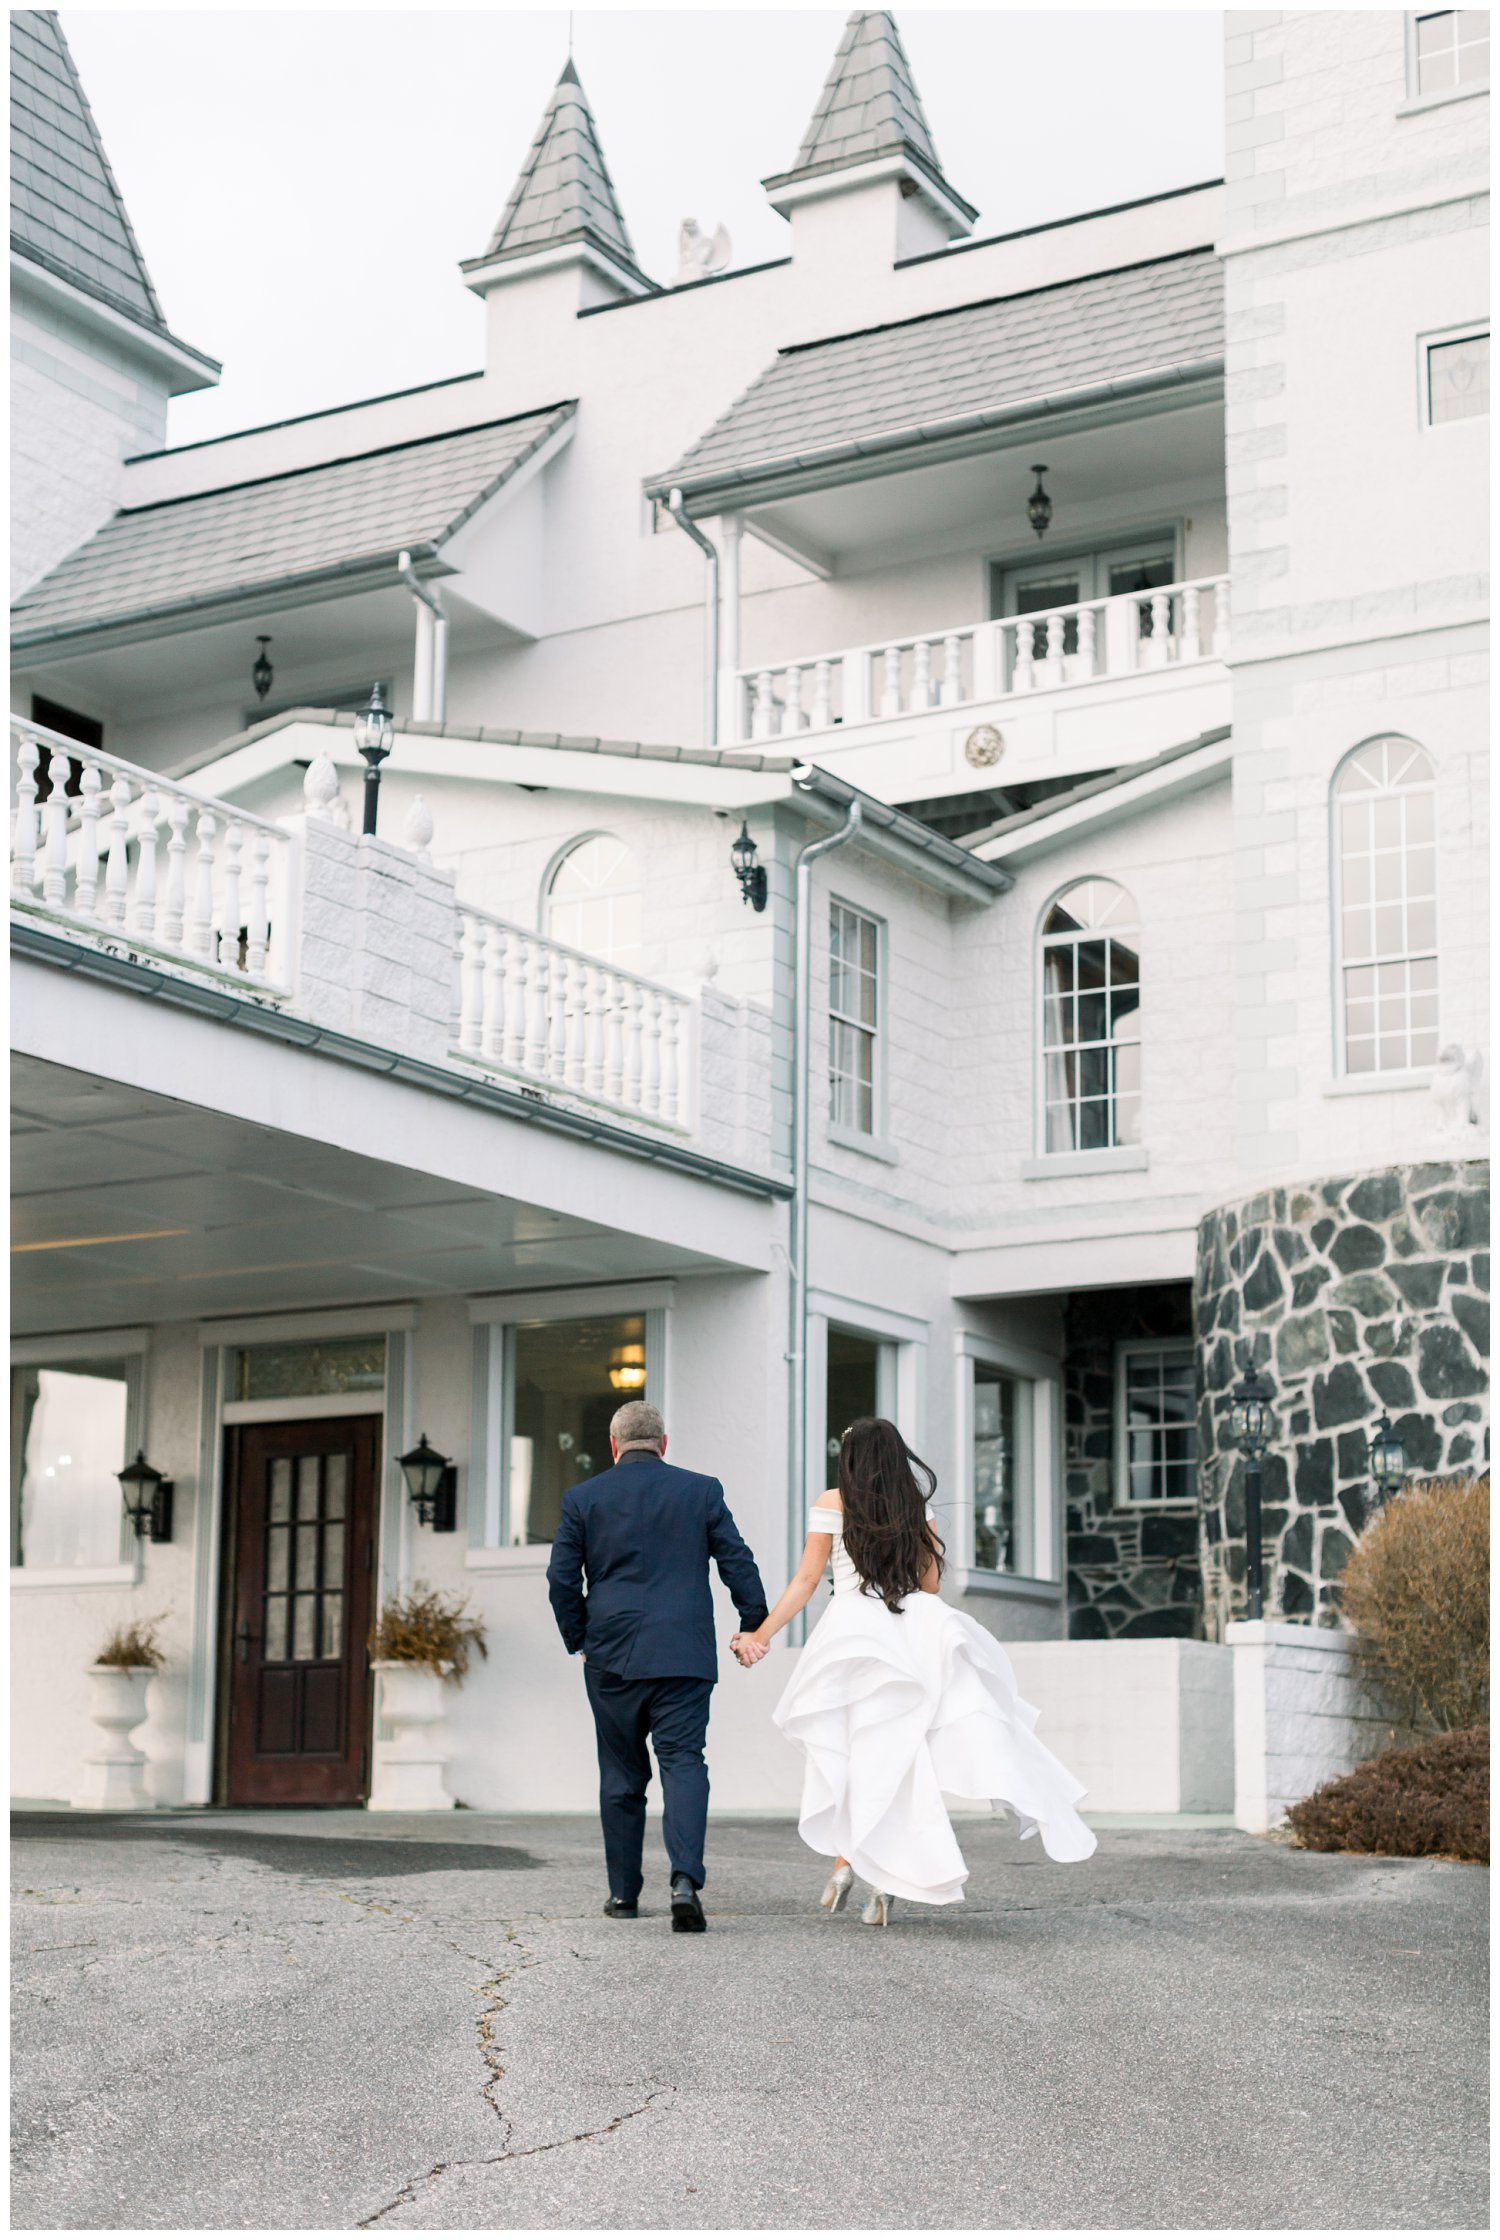 Smithmore Castle elopement wedding portraits in Asheville North Carolina by top wedding photographer Samantha Laffoon